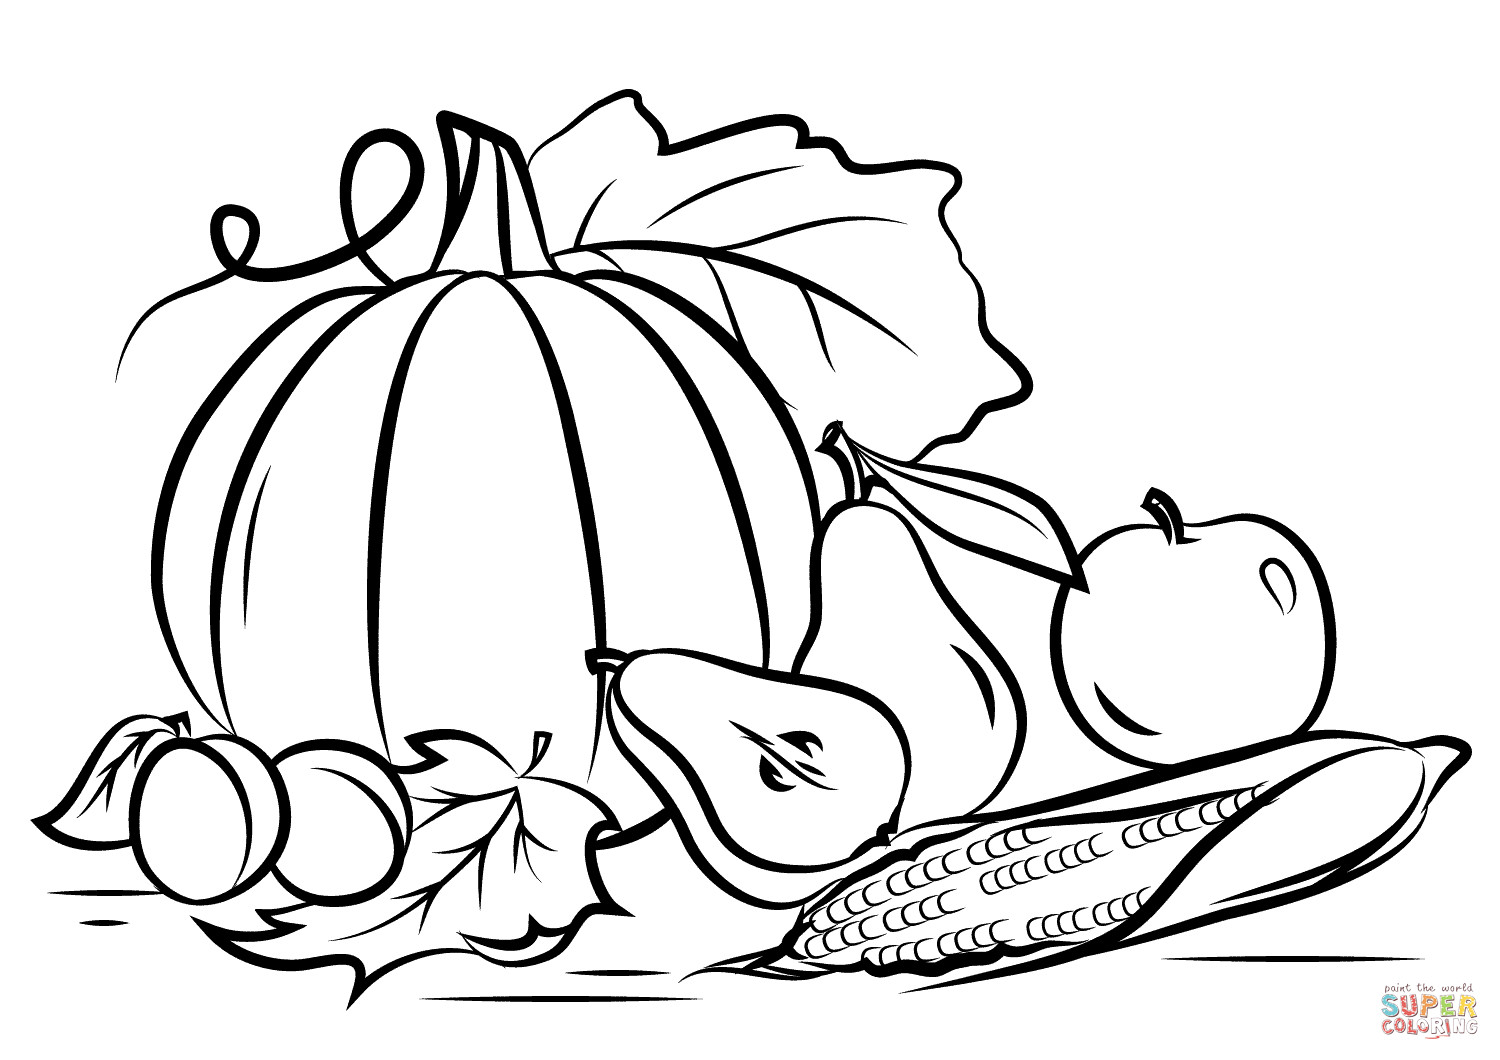 Free Printable Fall Coloring Pages
 Autumn Harvest coloring page